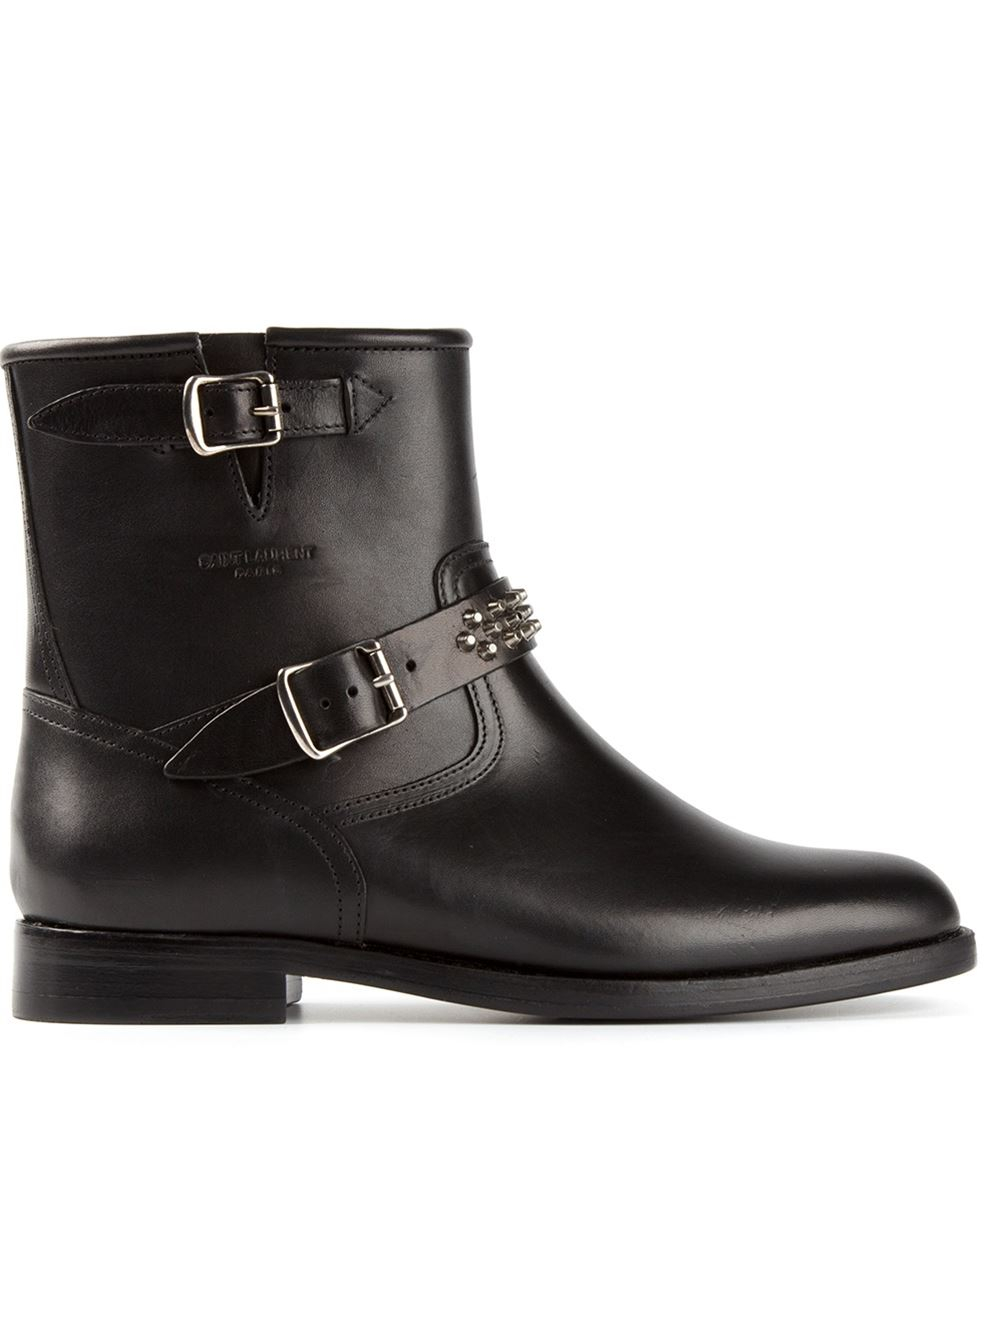 Saint laurent Classic Motorcycle Boots in Black | Lyst